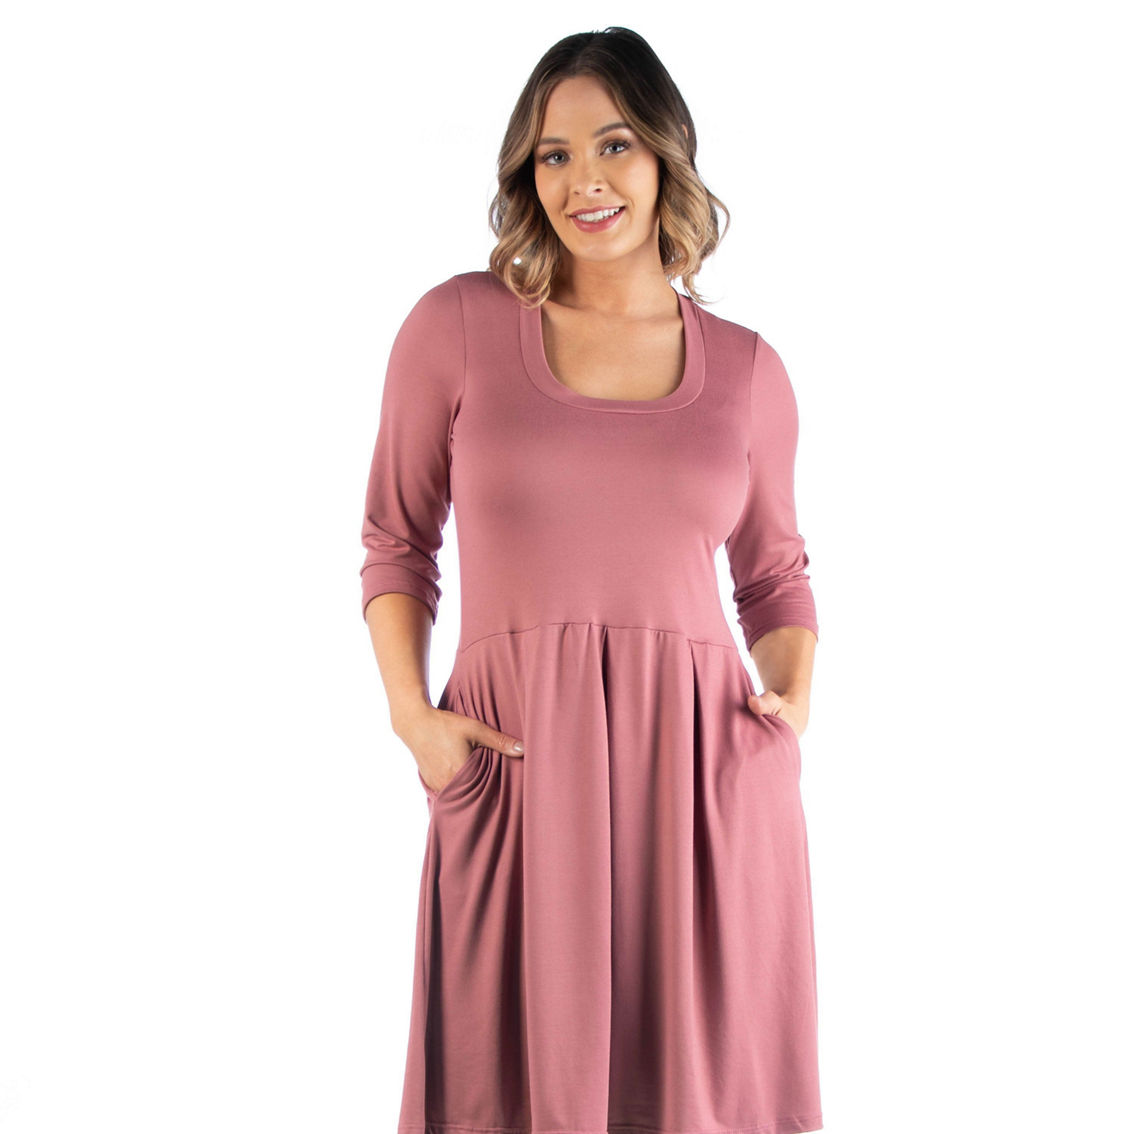 24seven Comfort Apparel Fit And Flare Plus Size Dress, Dresses, Clothing  & Accessories